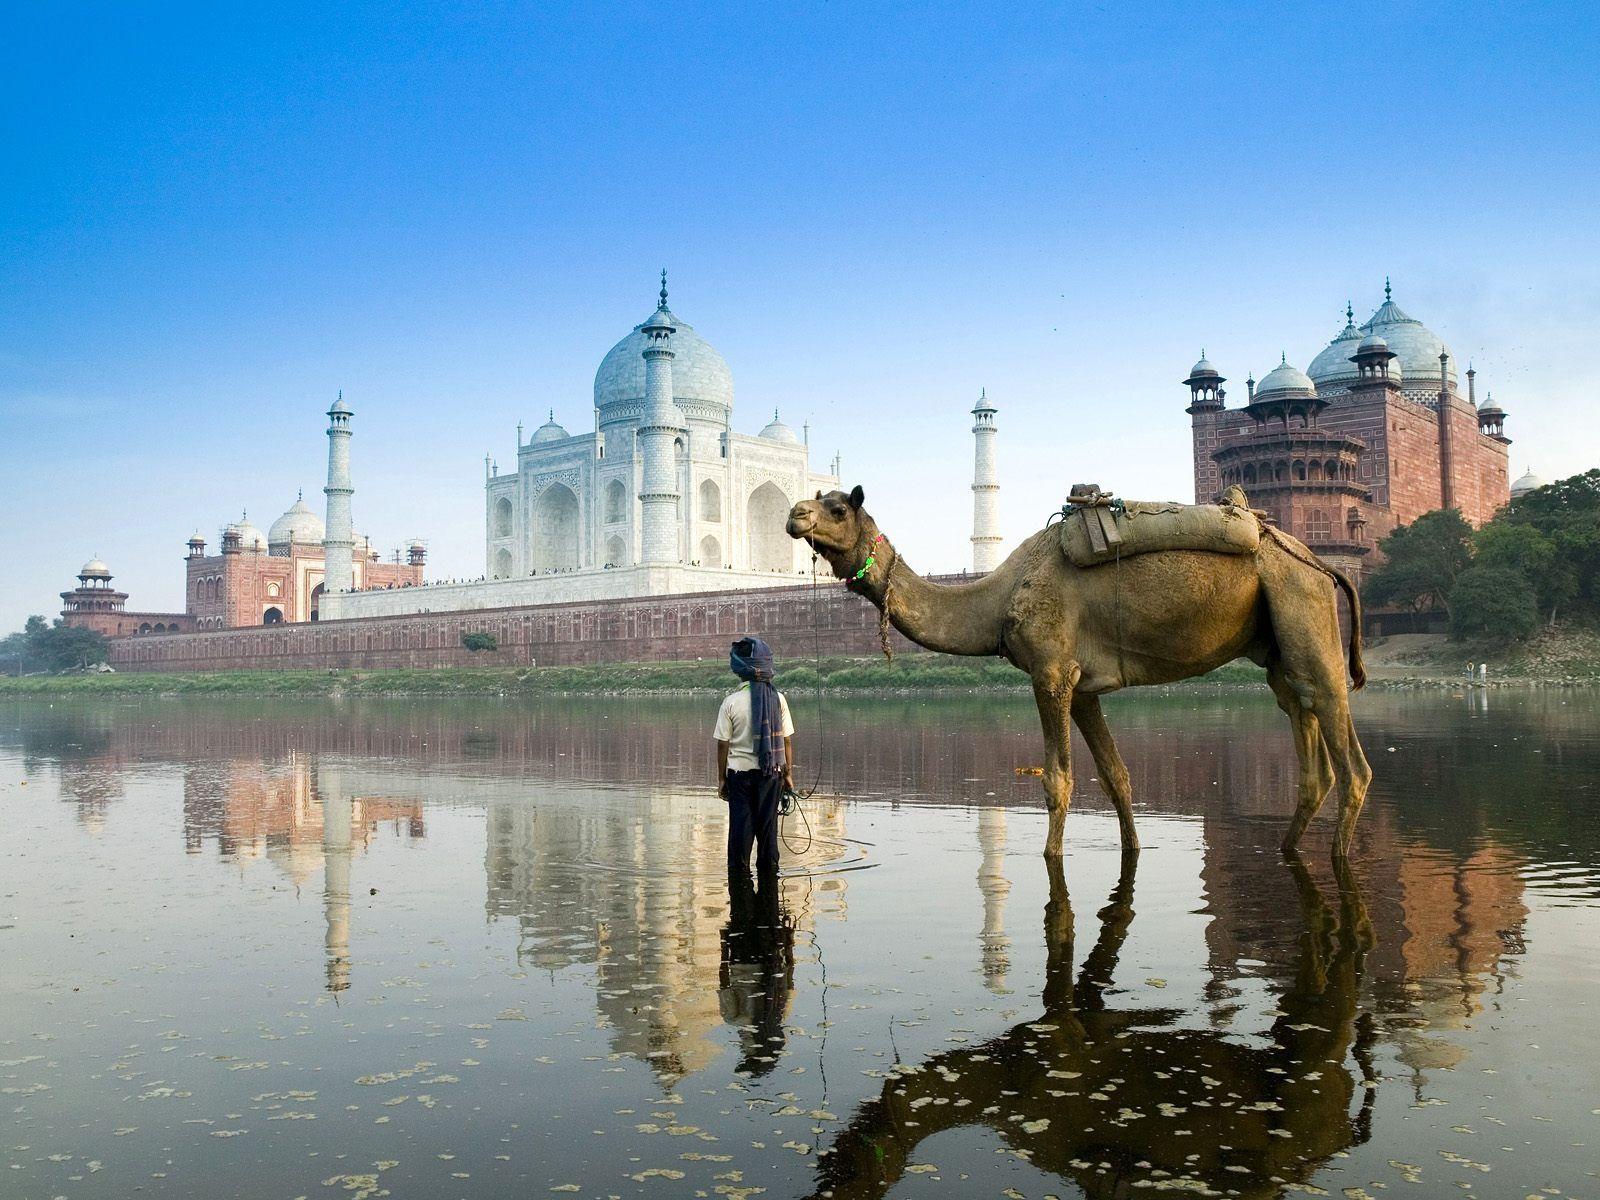 Yamuna River Agra India Wallpaper in jpg format for free download